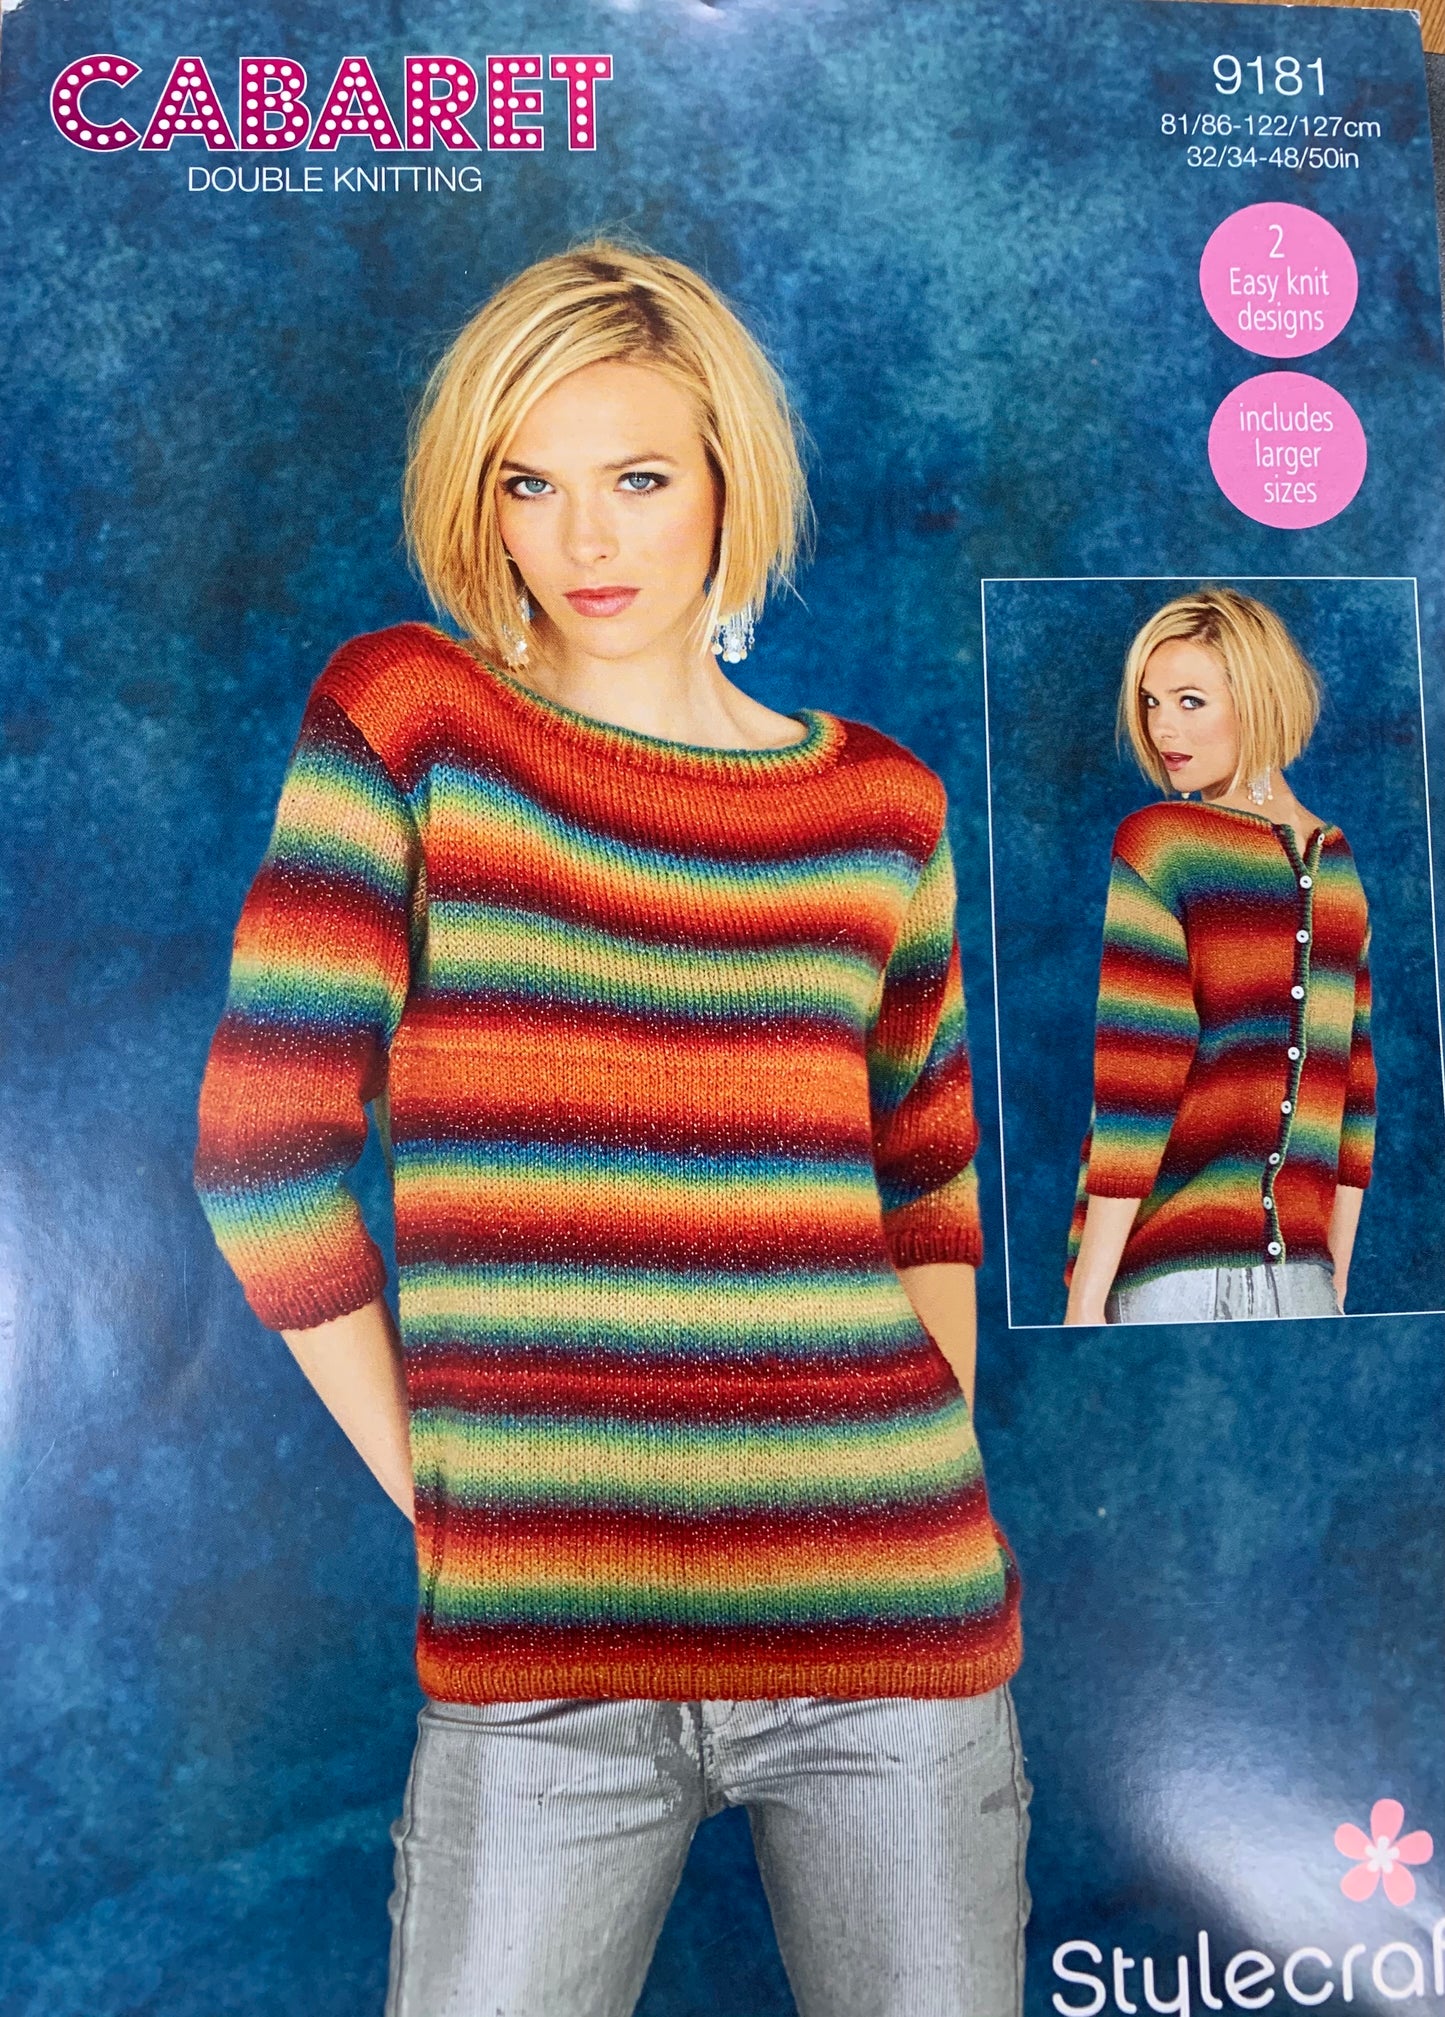 9181 Stylecraft Cabaret dk ladies sweater cowl neck and buttoned knitting pattern